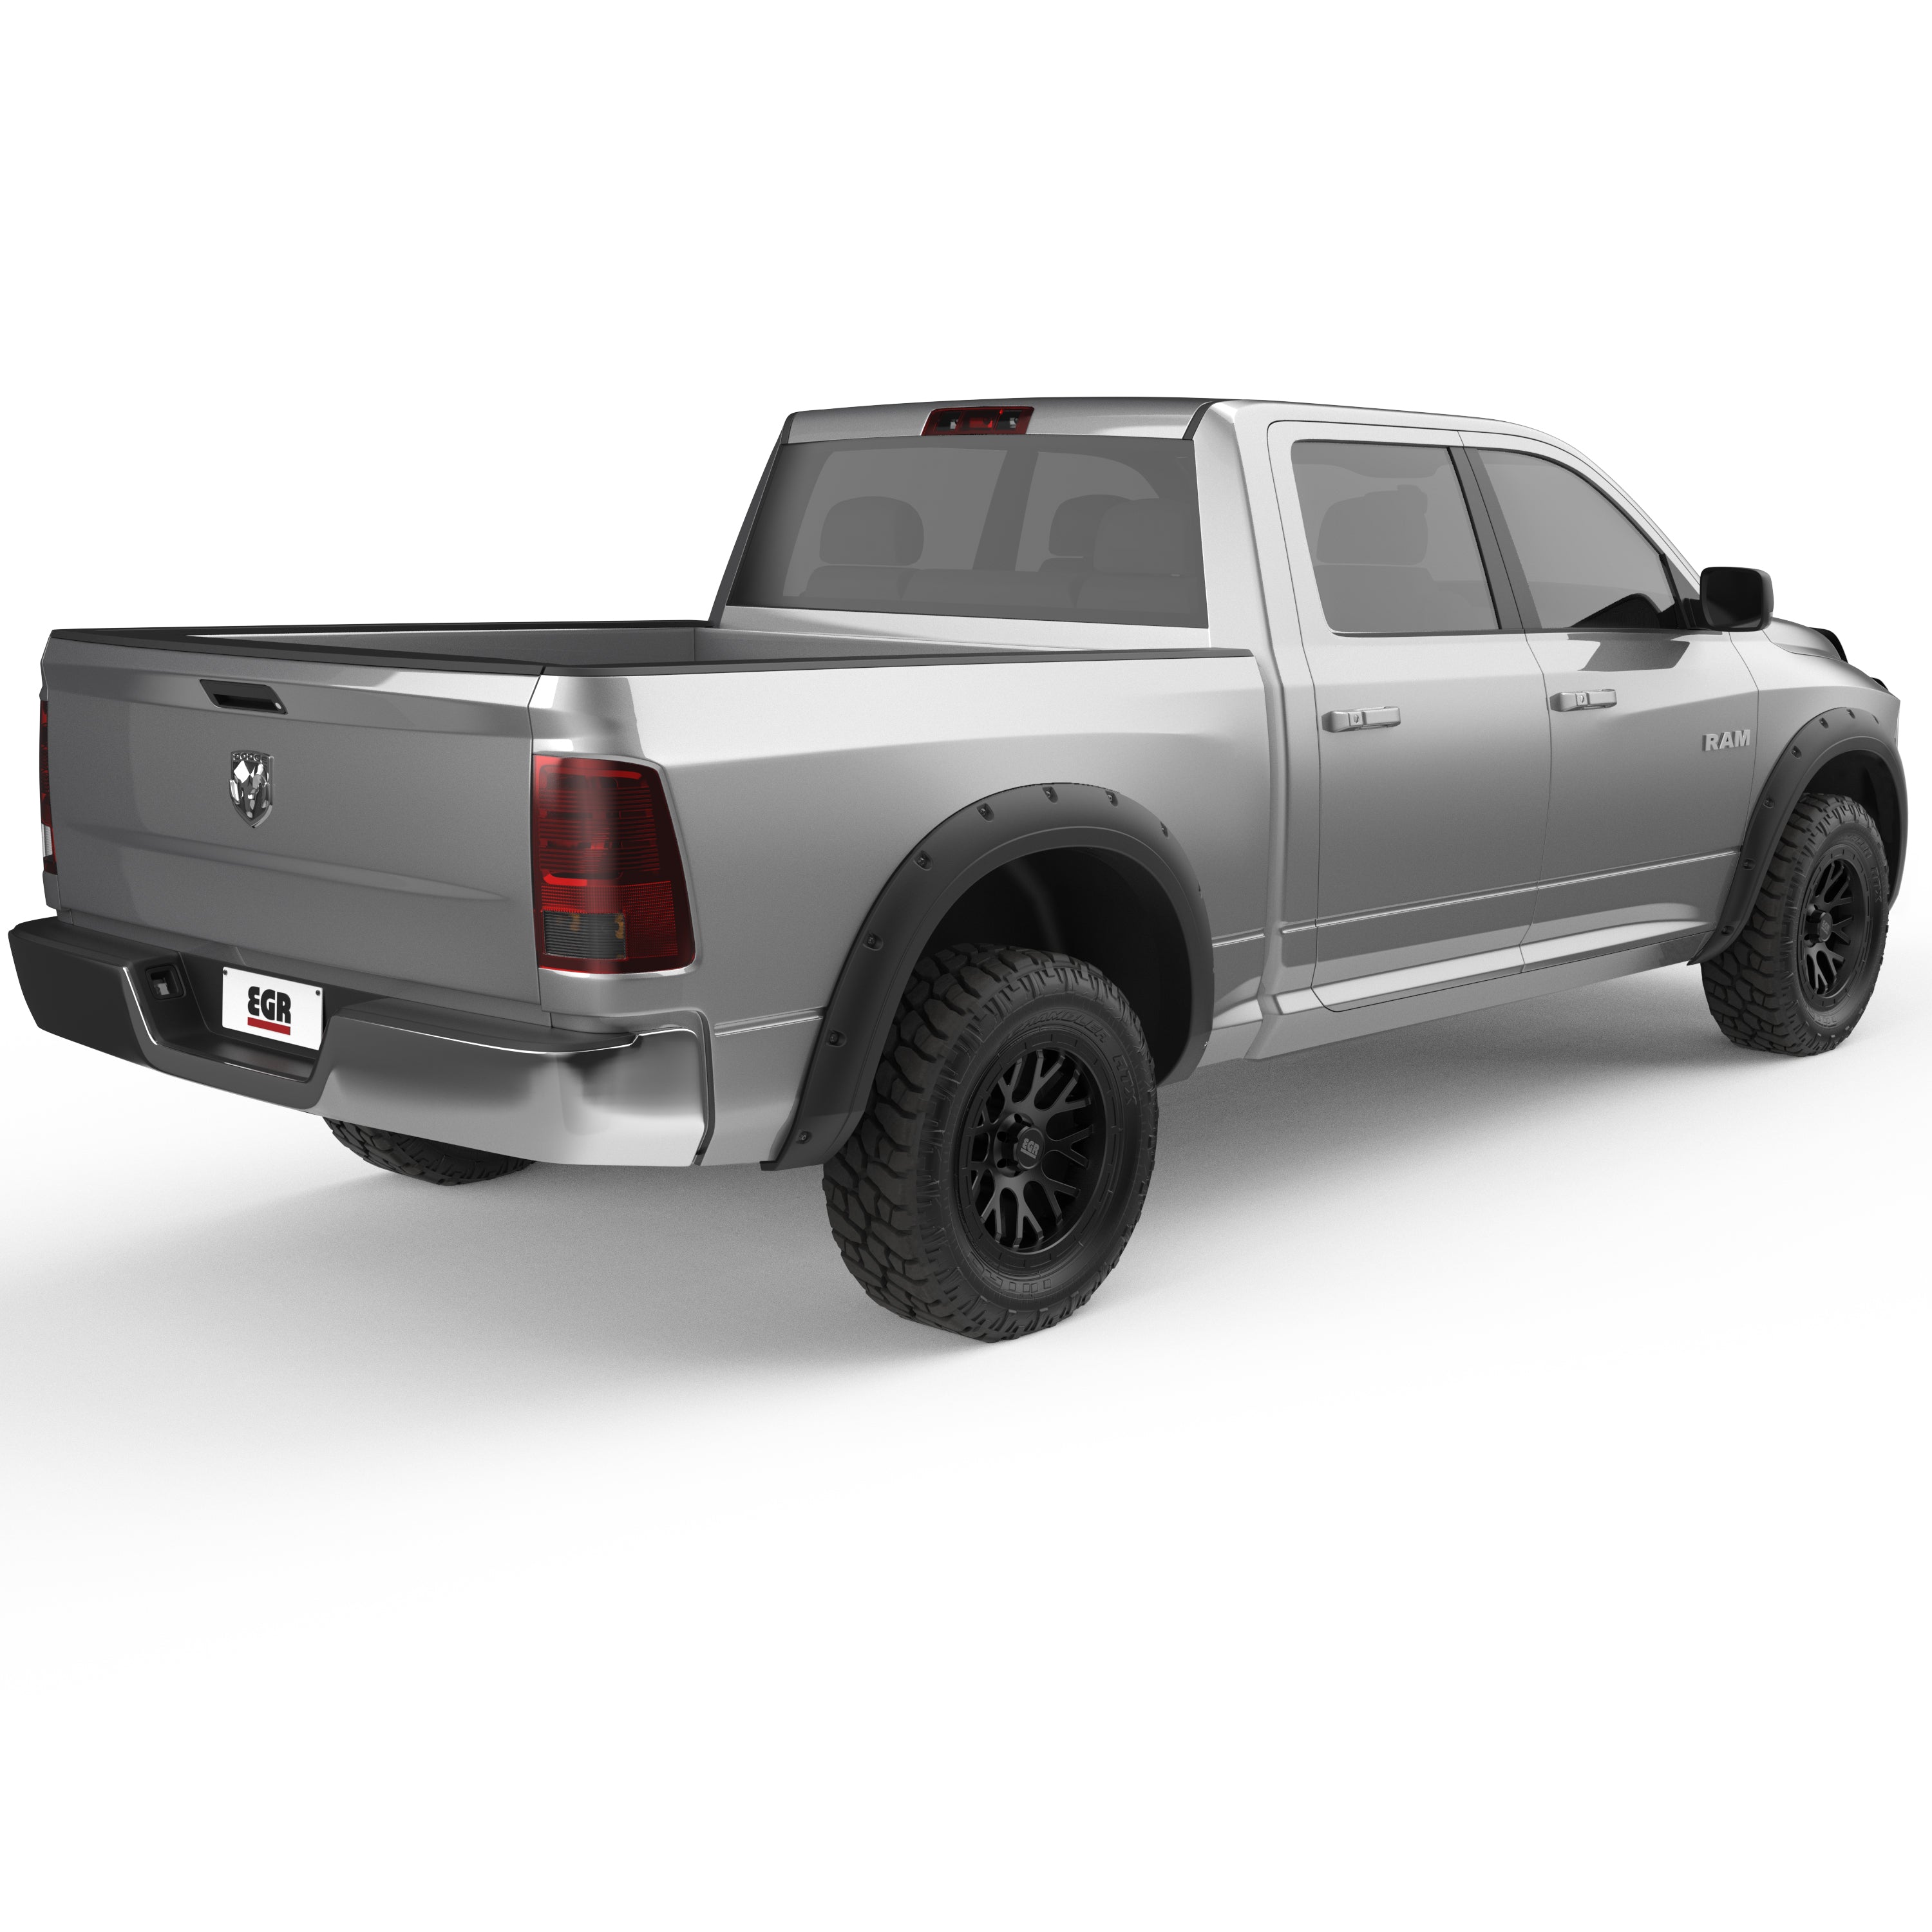 EGR Traditional Bolt-on look Fender Flares with Black-out Bolt Kit  11-18 Ram 1500 19-22 Ram 1500 Classic set of 4